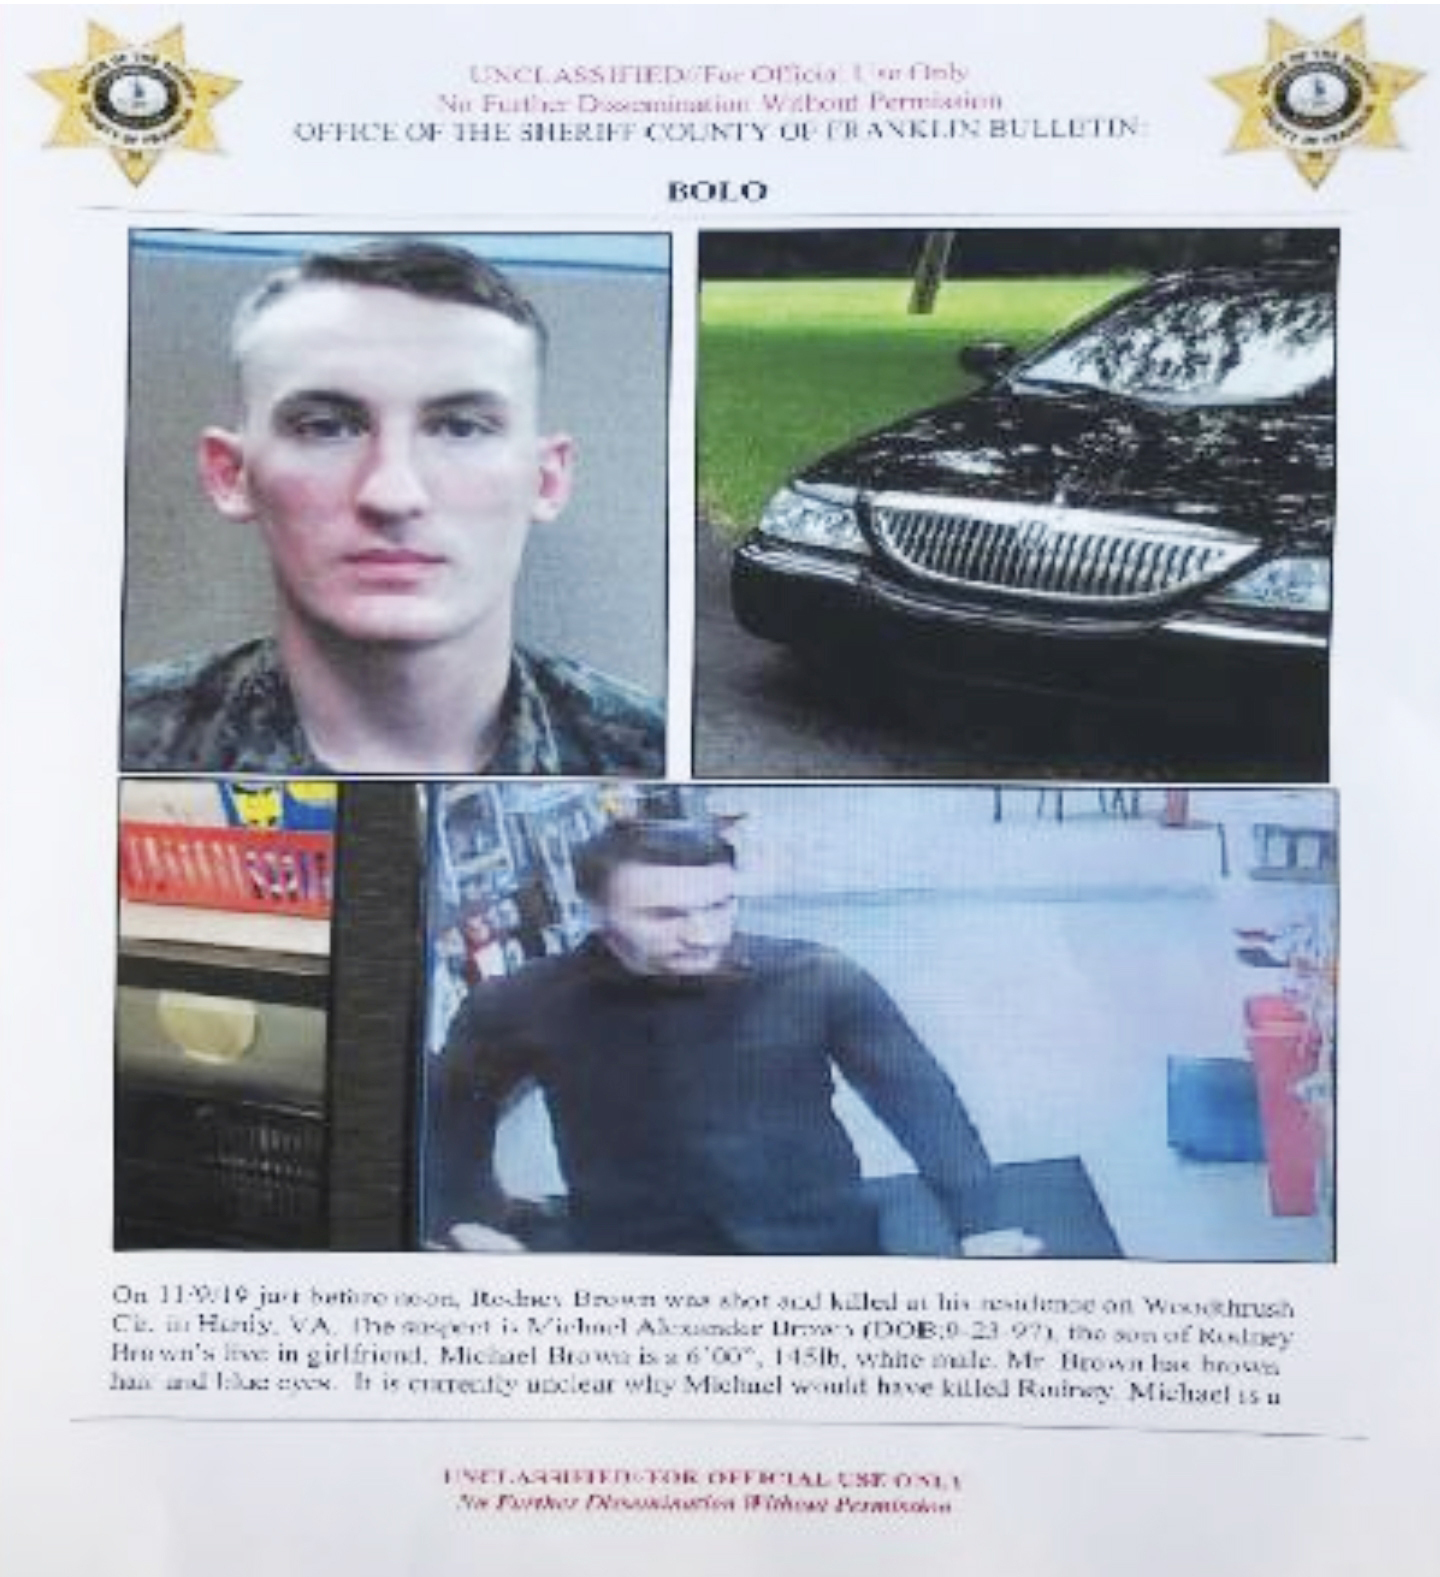 PHOTO: In this undated image released by the Franklin County (Va.) Sheriff's Office, U. S. Marine Michael Alexander Brown is shown. The Marine, who has been on the run for a couple of weeks, has been arrested.